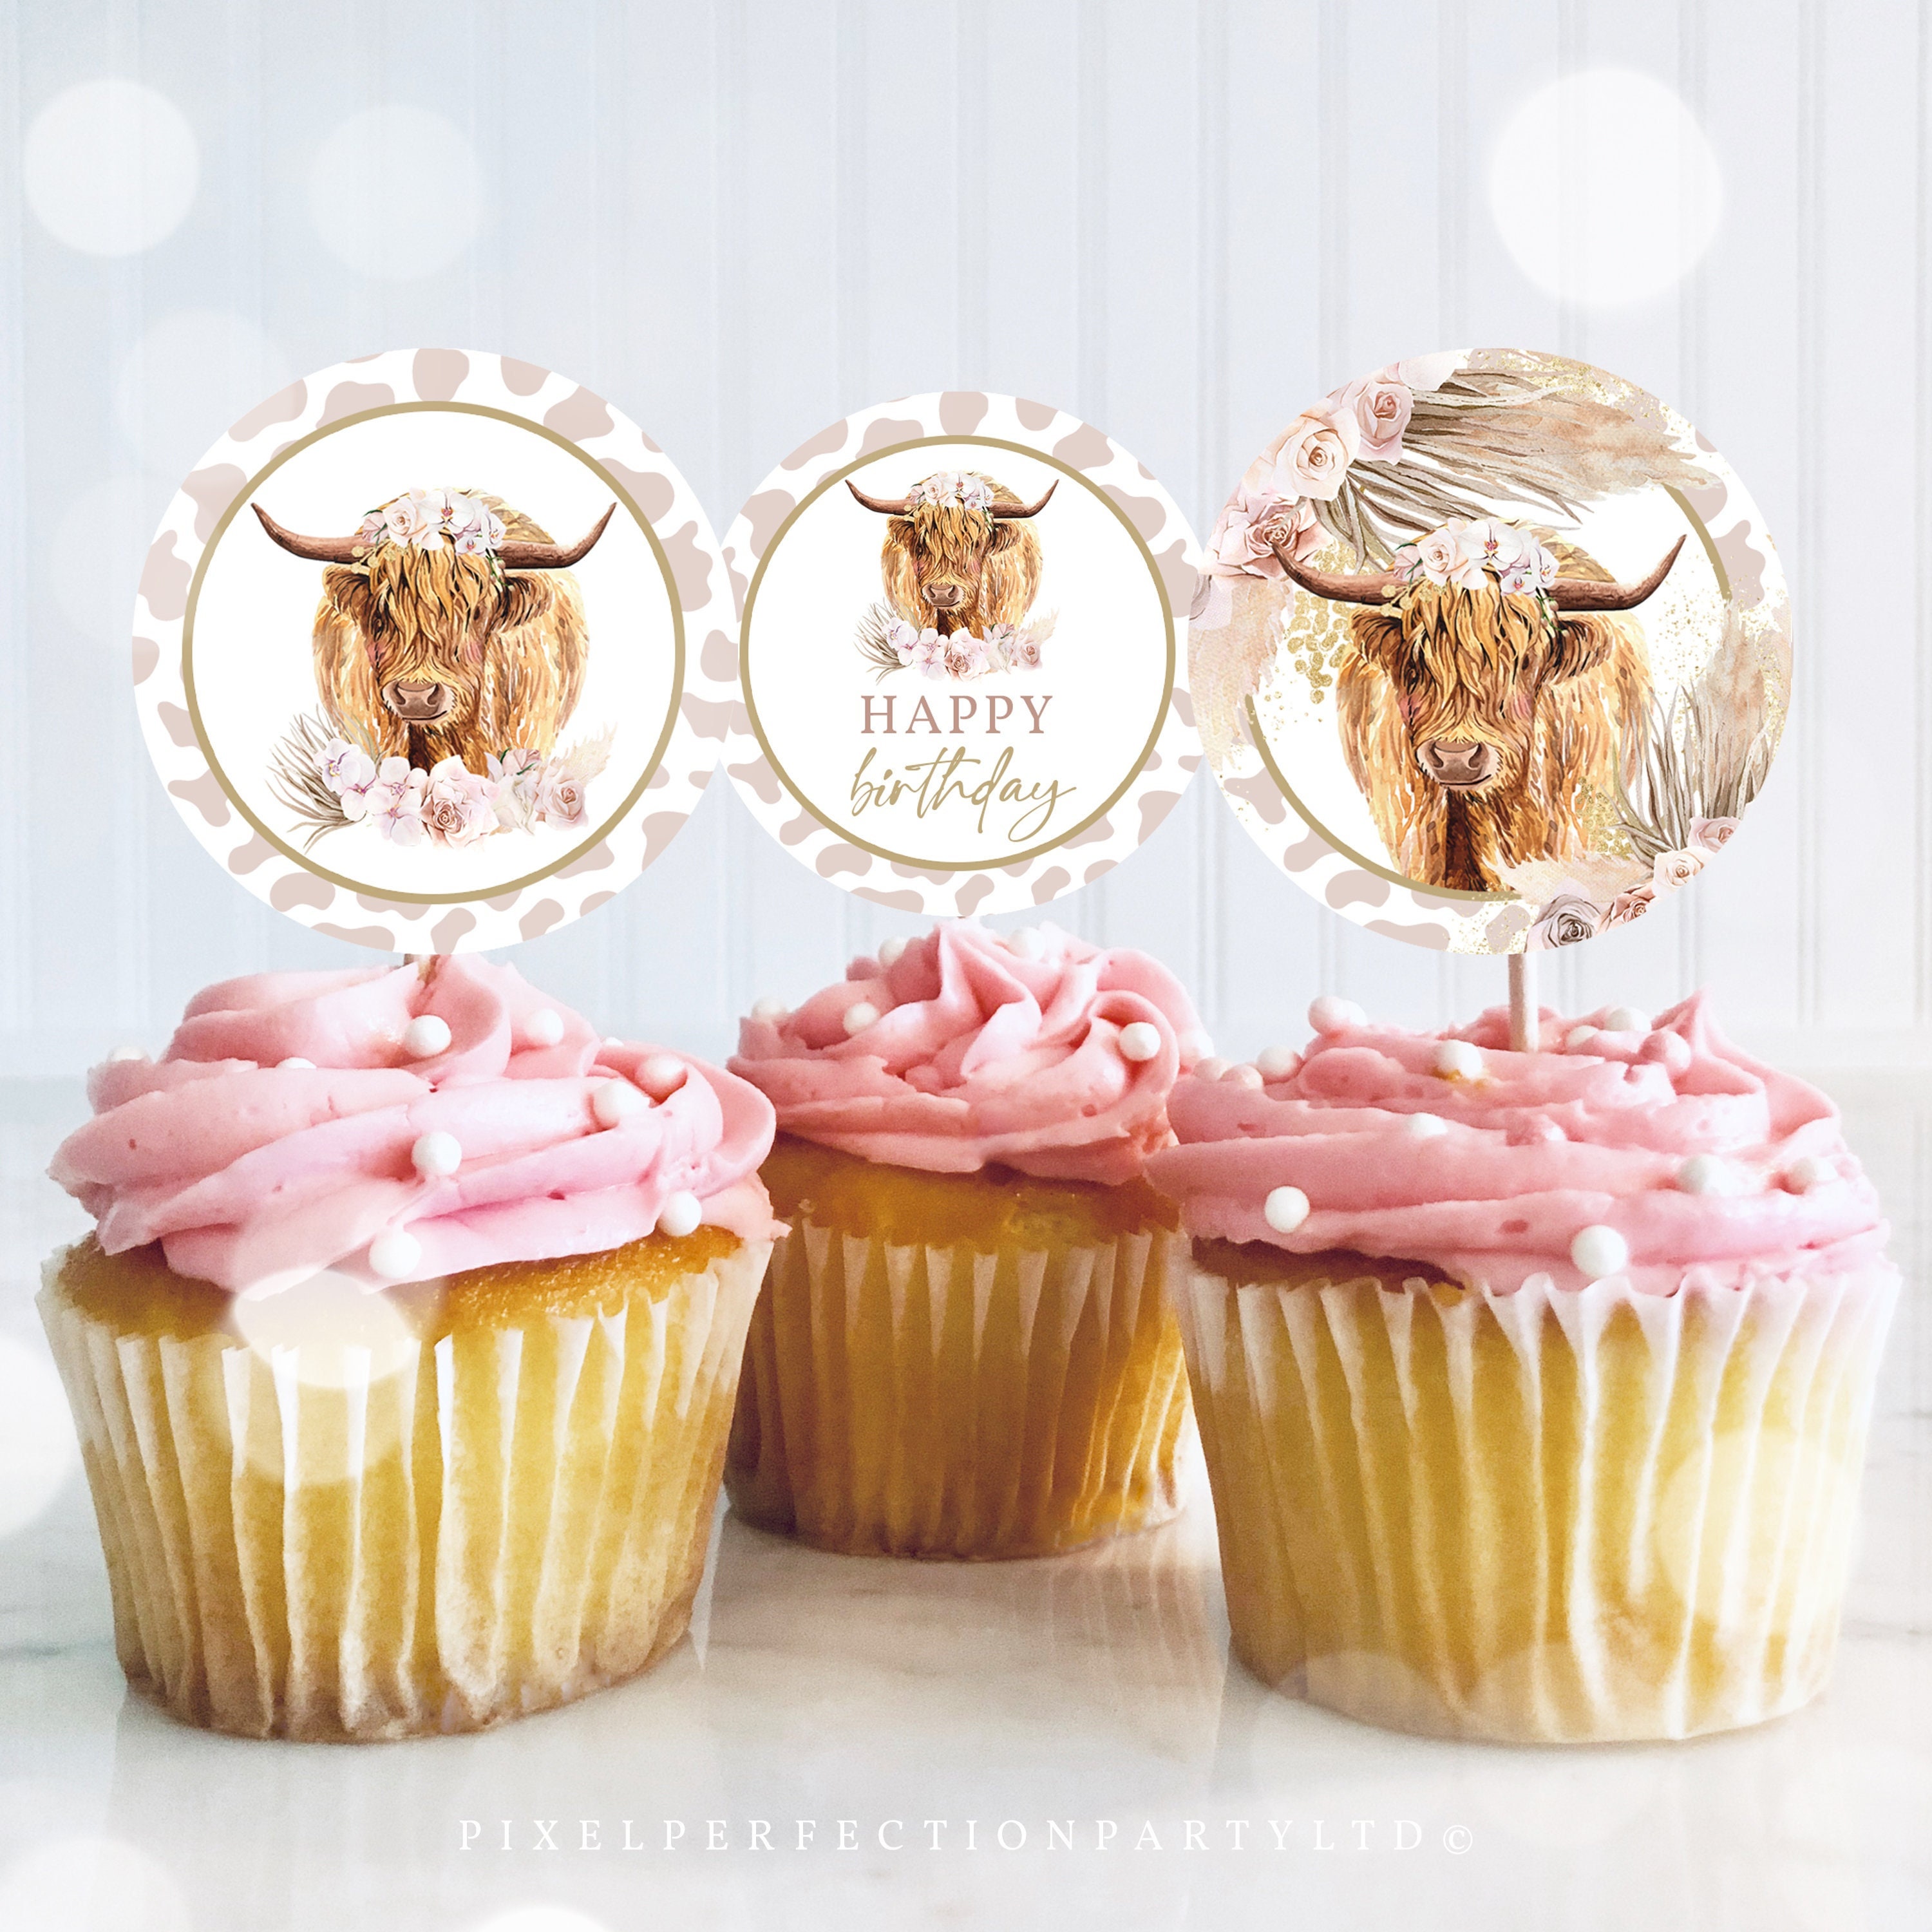 12 x 2 / 5cm Cute Highland Cow cupcake toppers wafer paper or icing